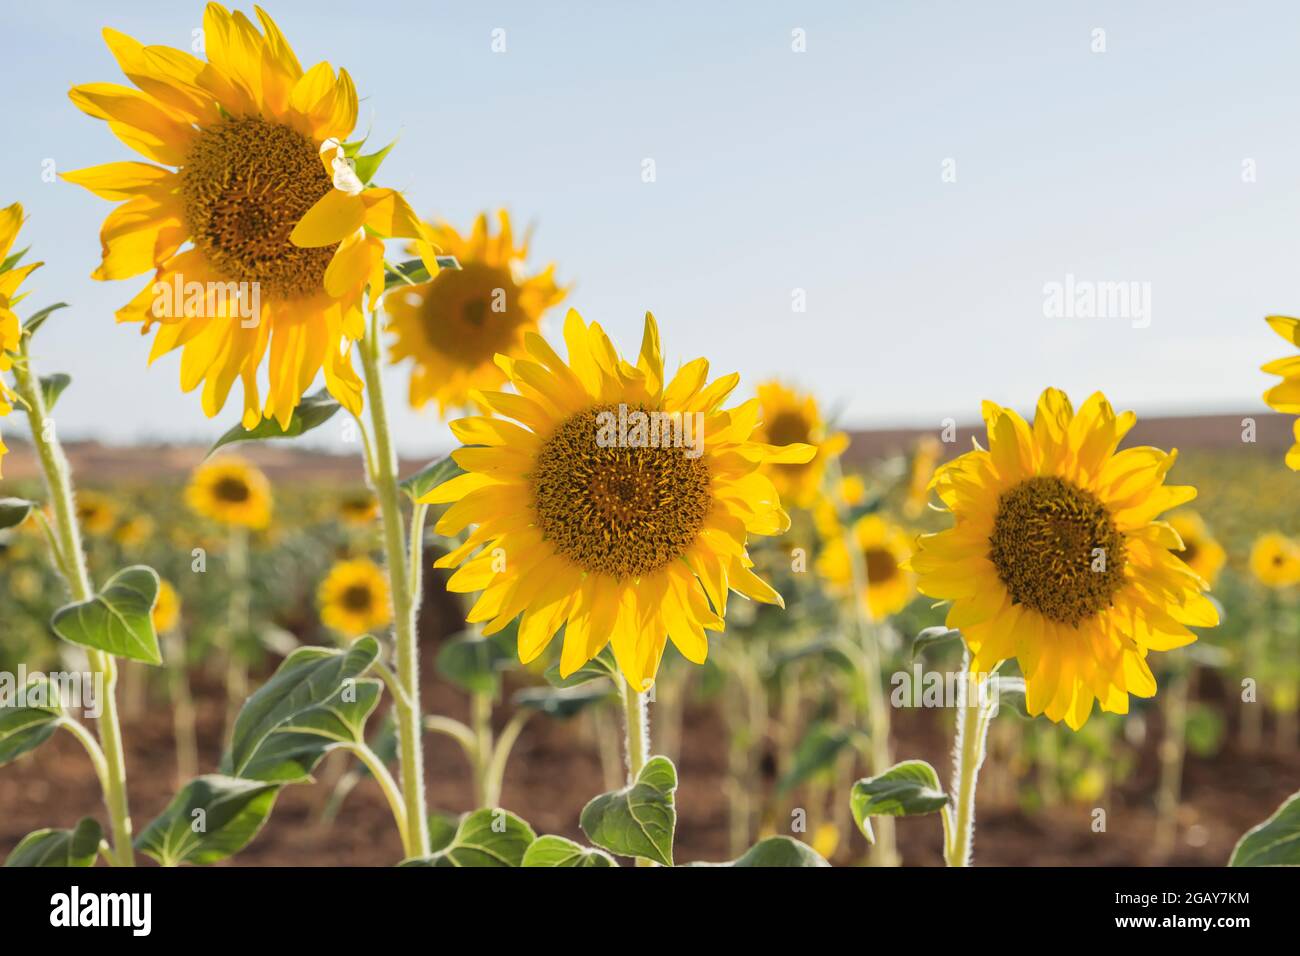 Sunflower plantation crops in bloom Stock Photo